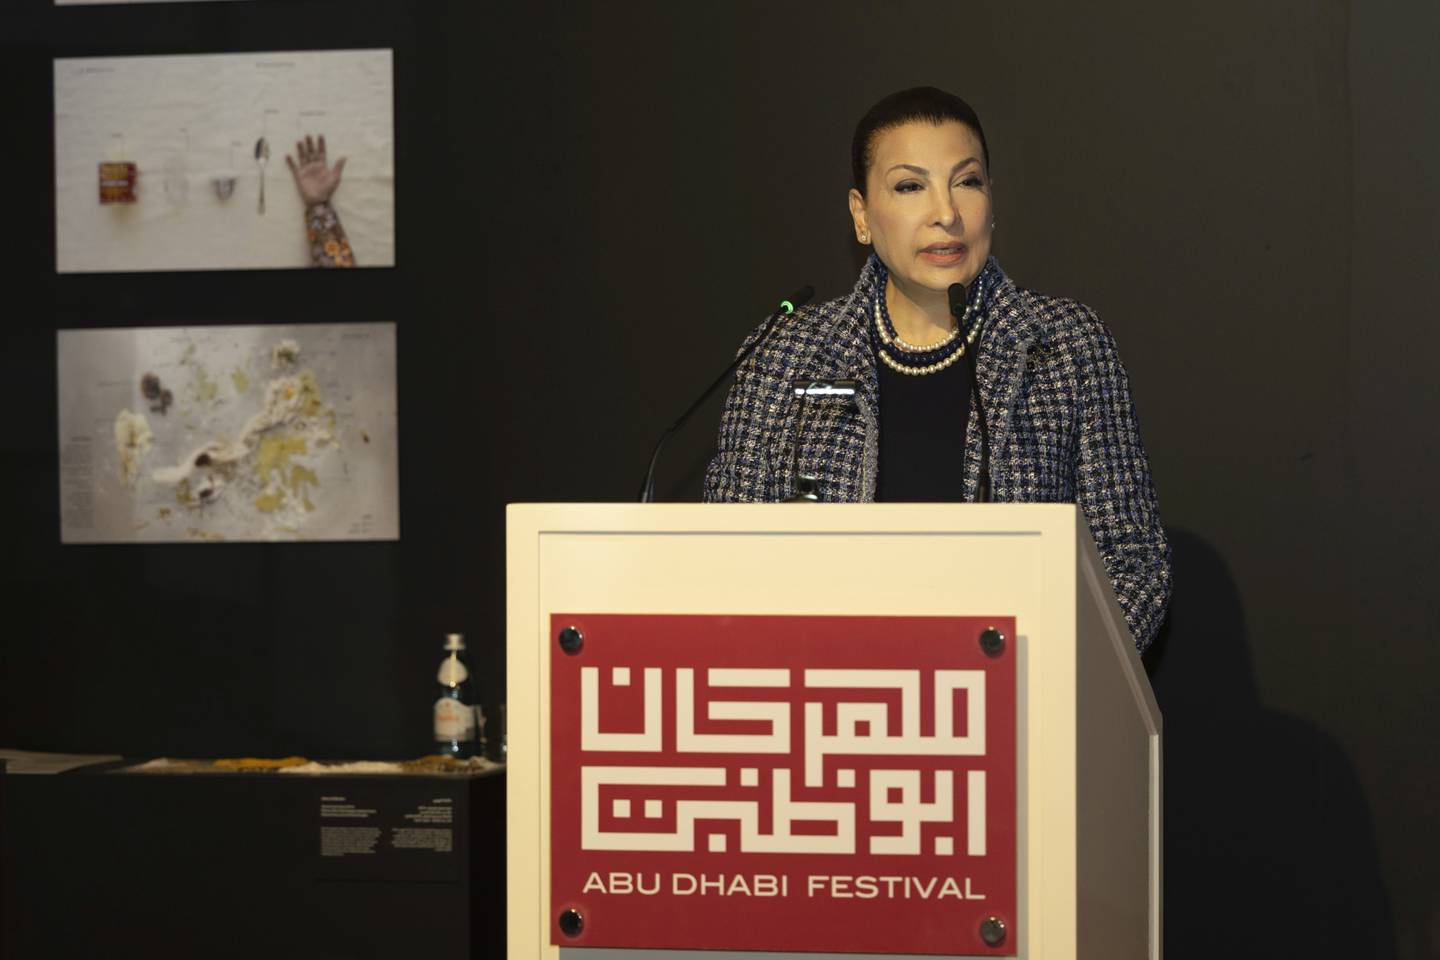 Huda Alkhamis-Kanoo, Founder of the Abu Dhabi Music and Arts Foundation and the artistic director of Abu Dhabi Festival. Photo: Abu Dhabi Music and Arts Foundation